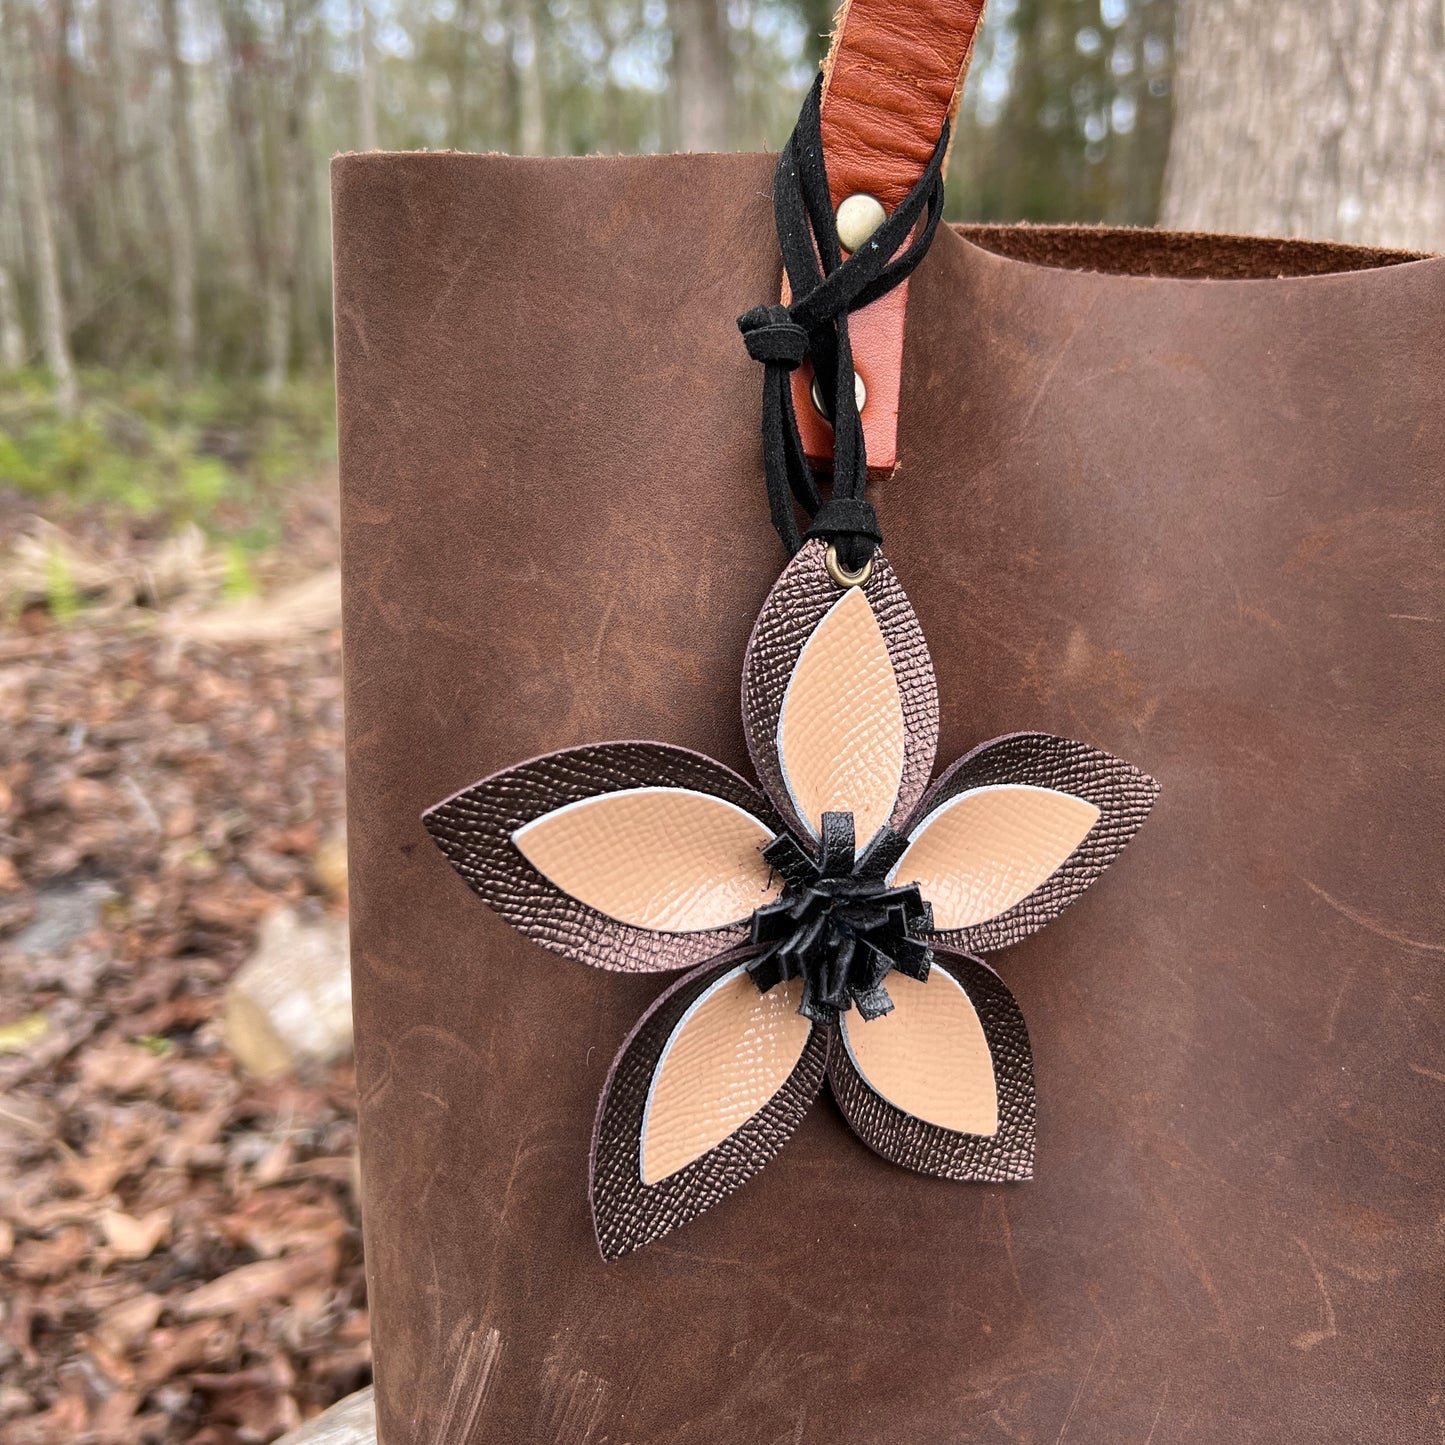 Leather Flower Bag Charm - Large Flower with Loop -Brown Metallic, Cream and Black